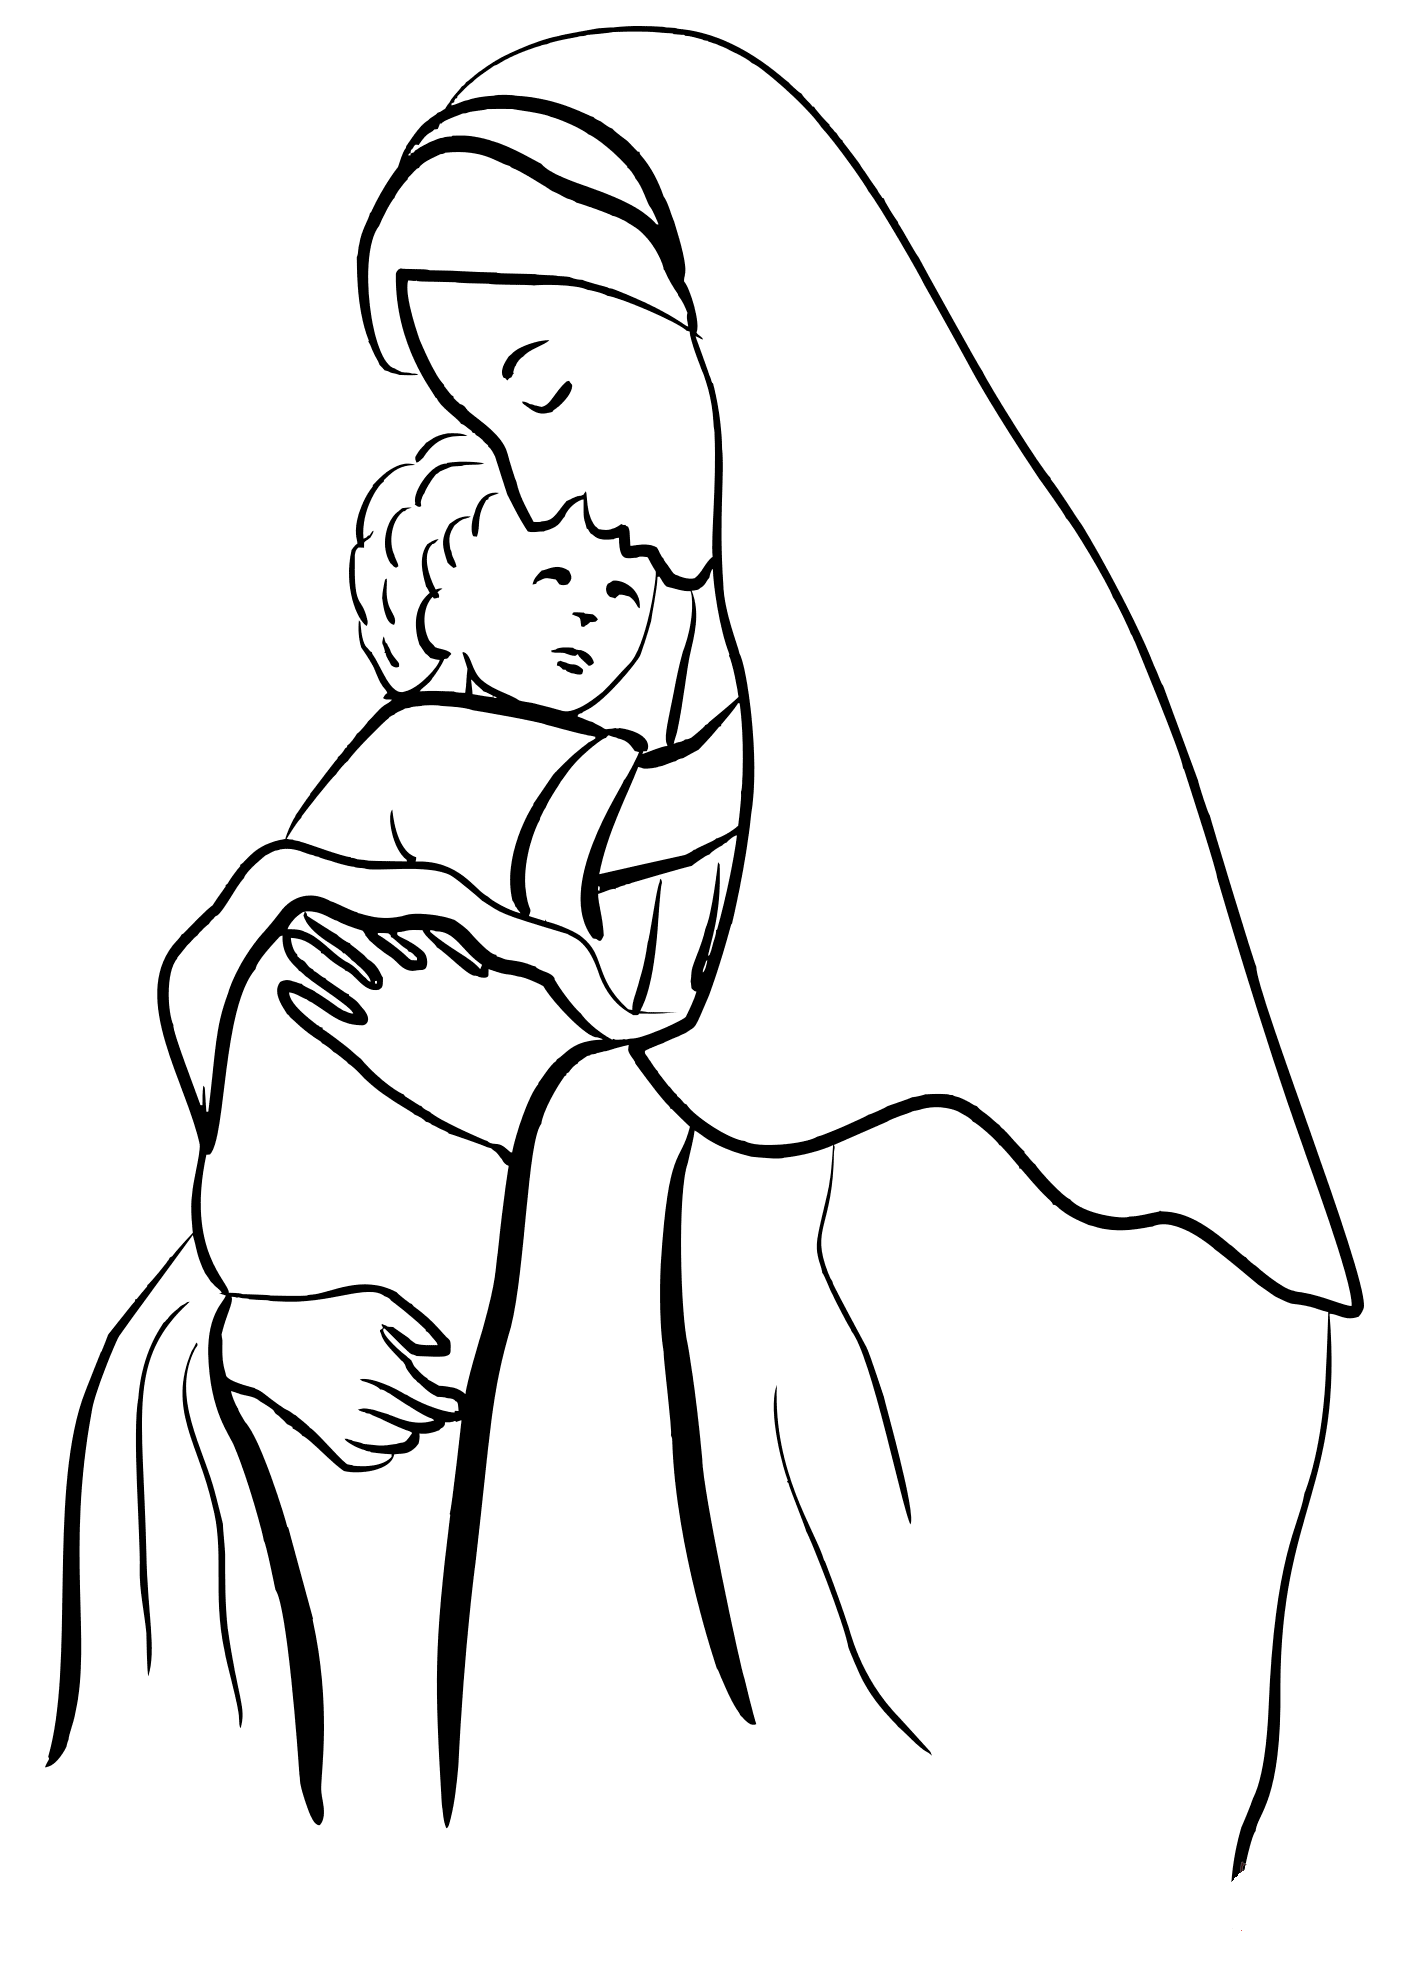 Baby Jesus Coloring Page For Kids